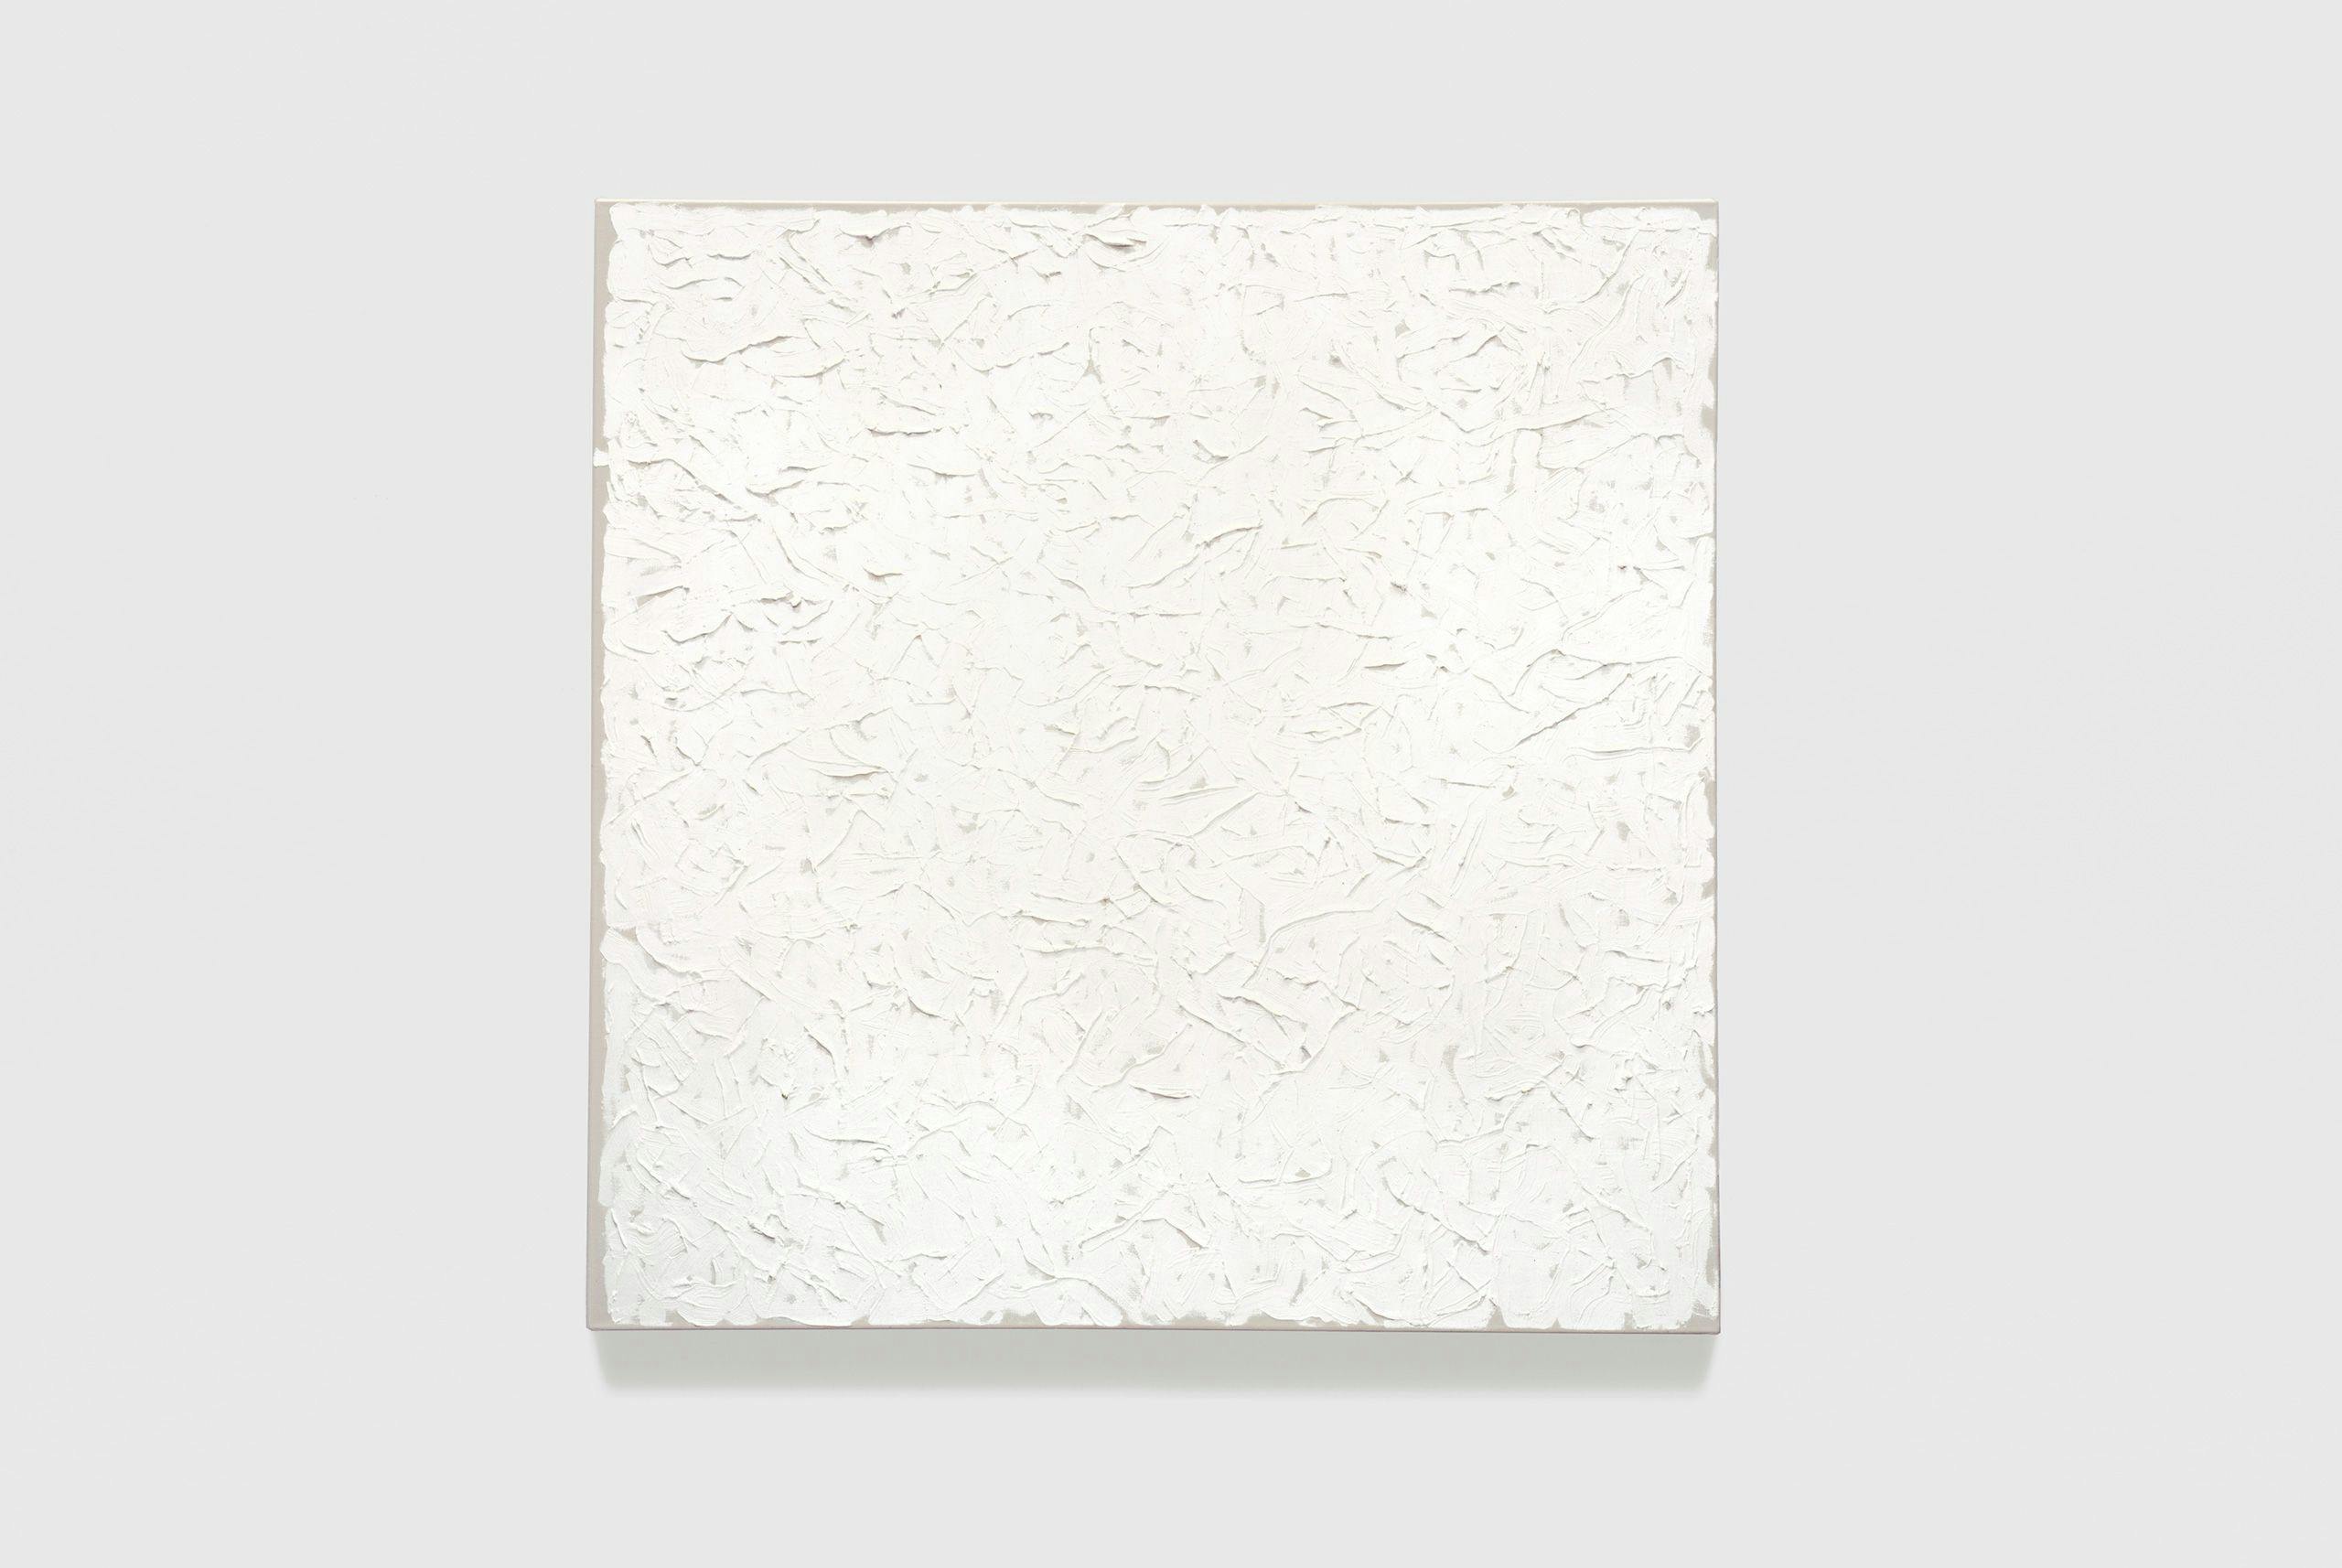 A painting by Robert Ryman titled Large-Small, Thick-Thin 2, dated 2008